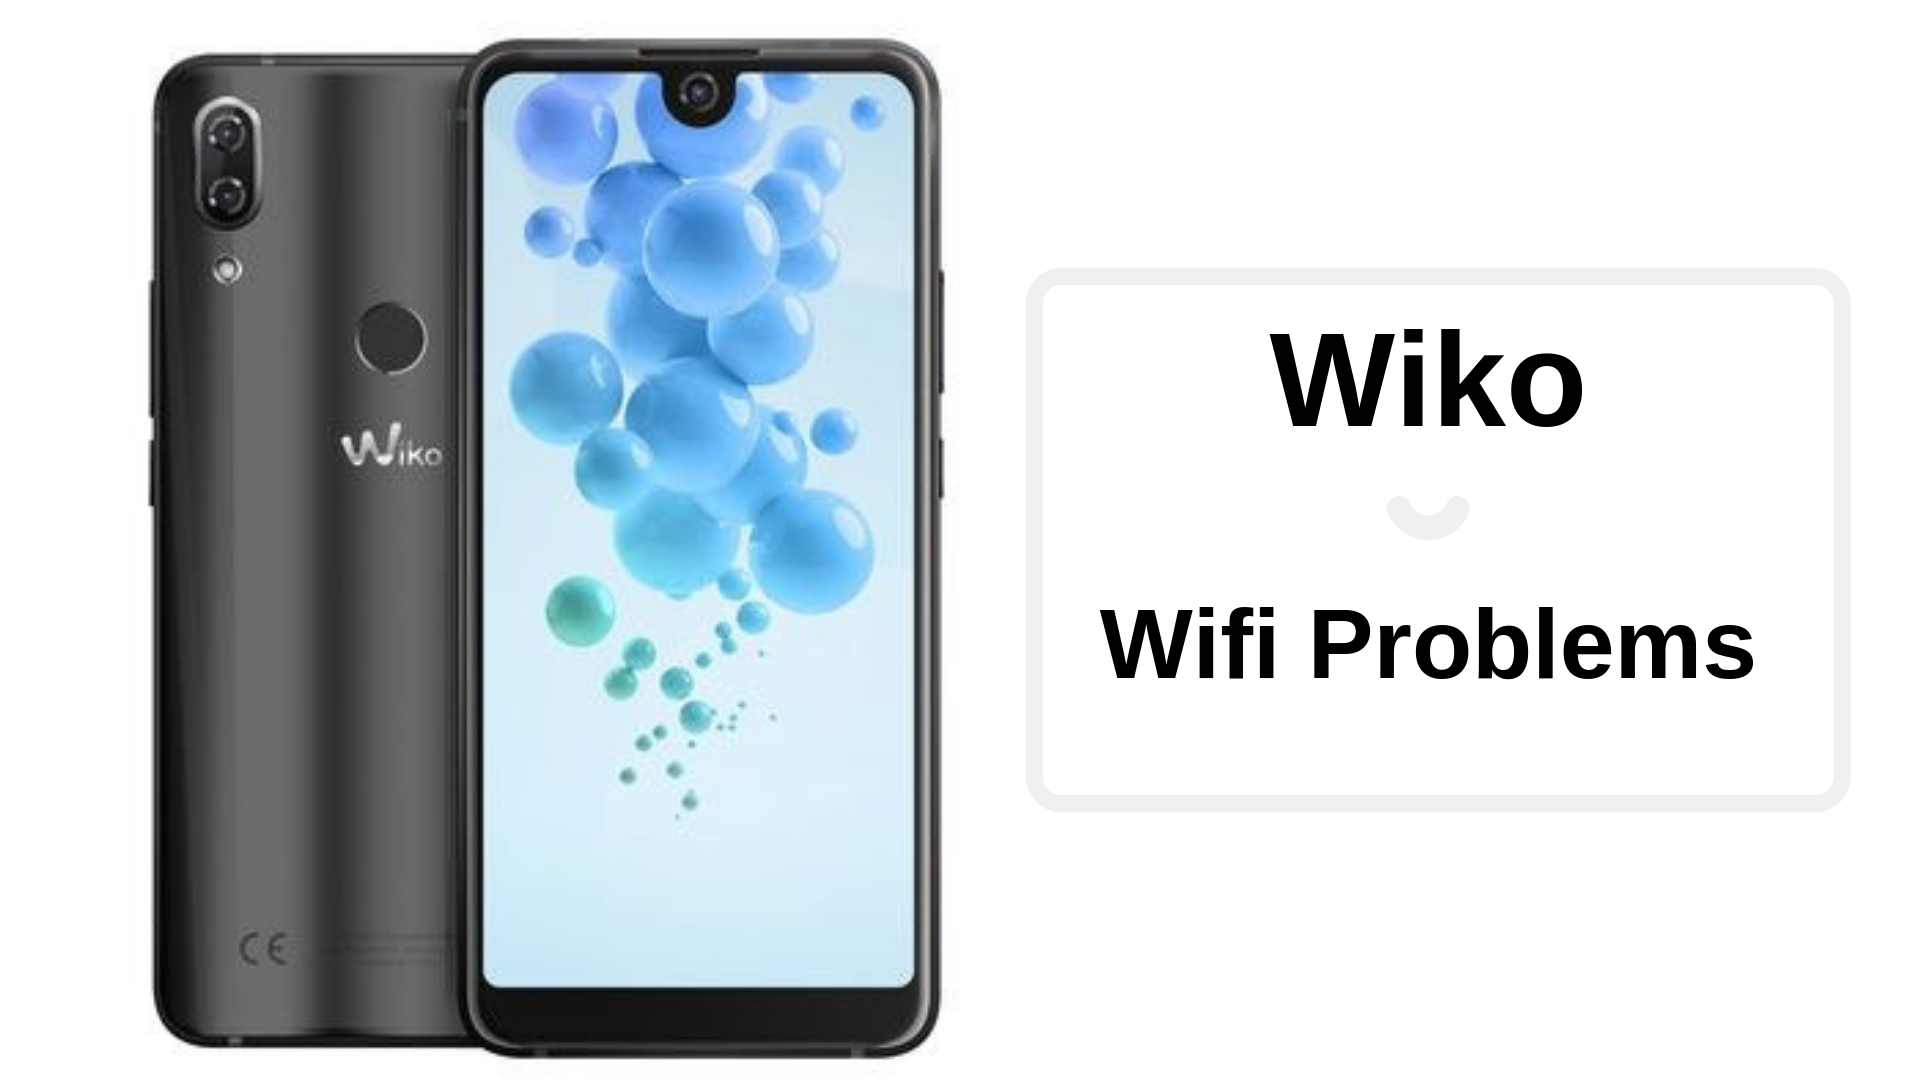 Quick Guide To Fix Wiko Wifi Problems [Troubleshoot]